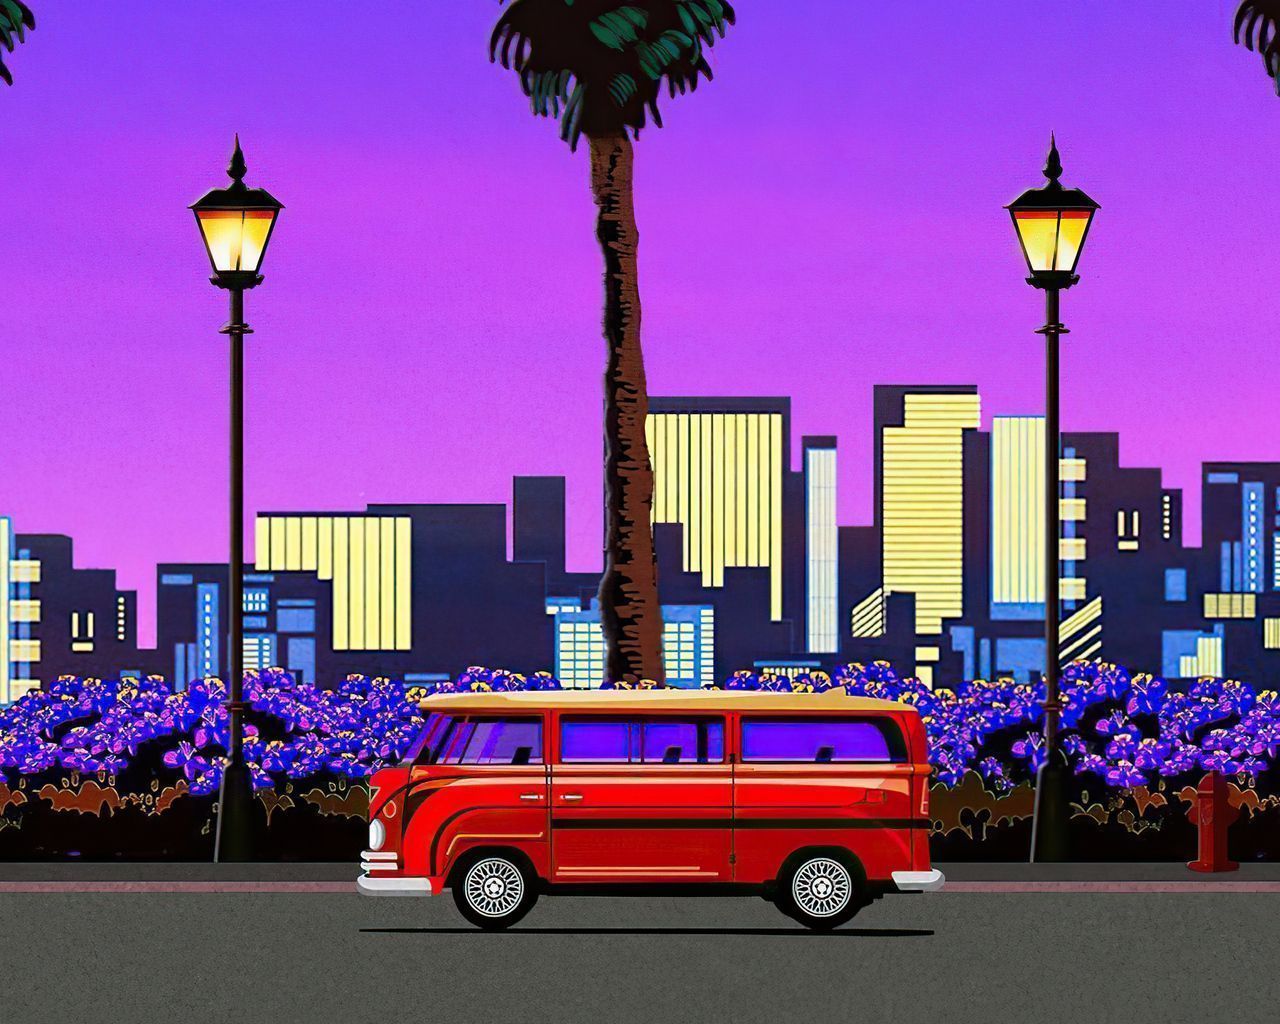 A red and yellow volkswagen van in front of a cityscape at night. - Vaporwave, 1280x1024